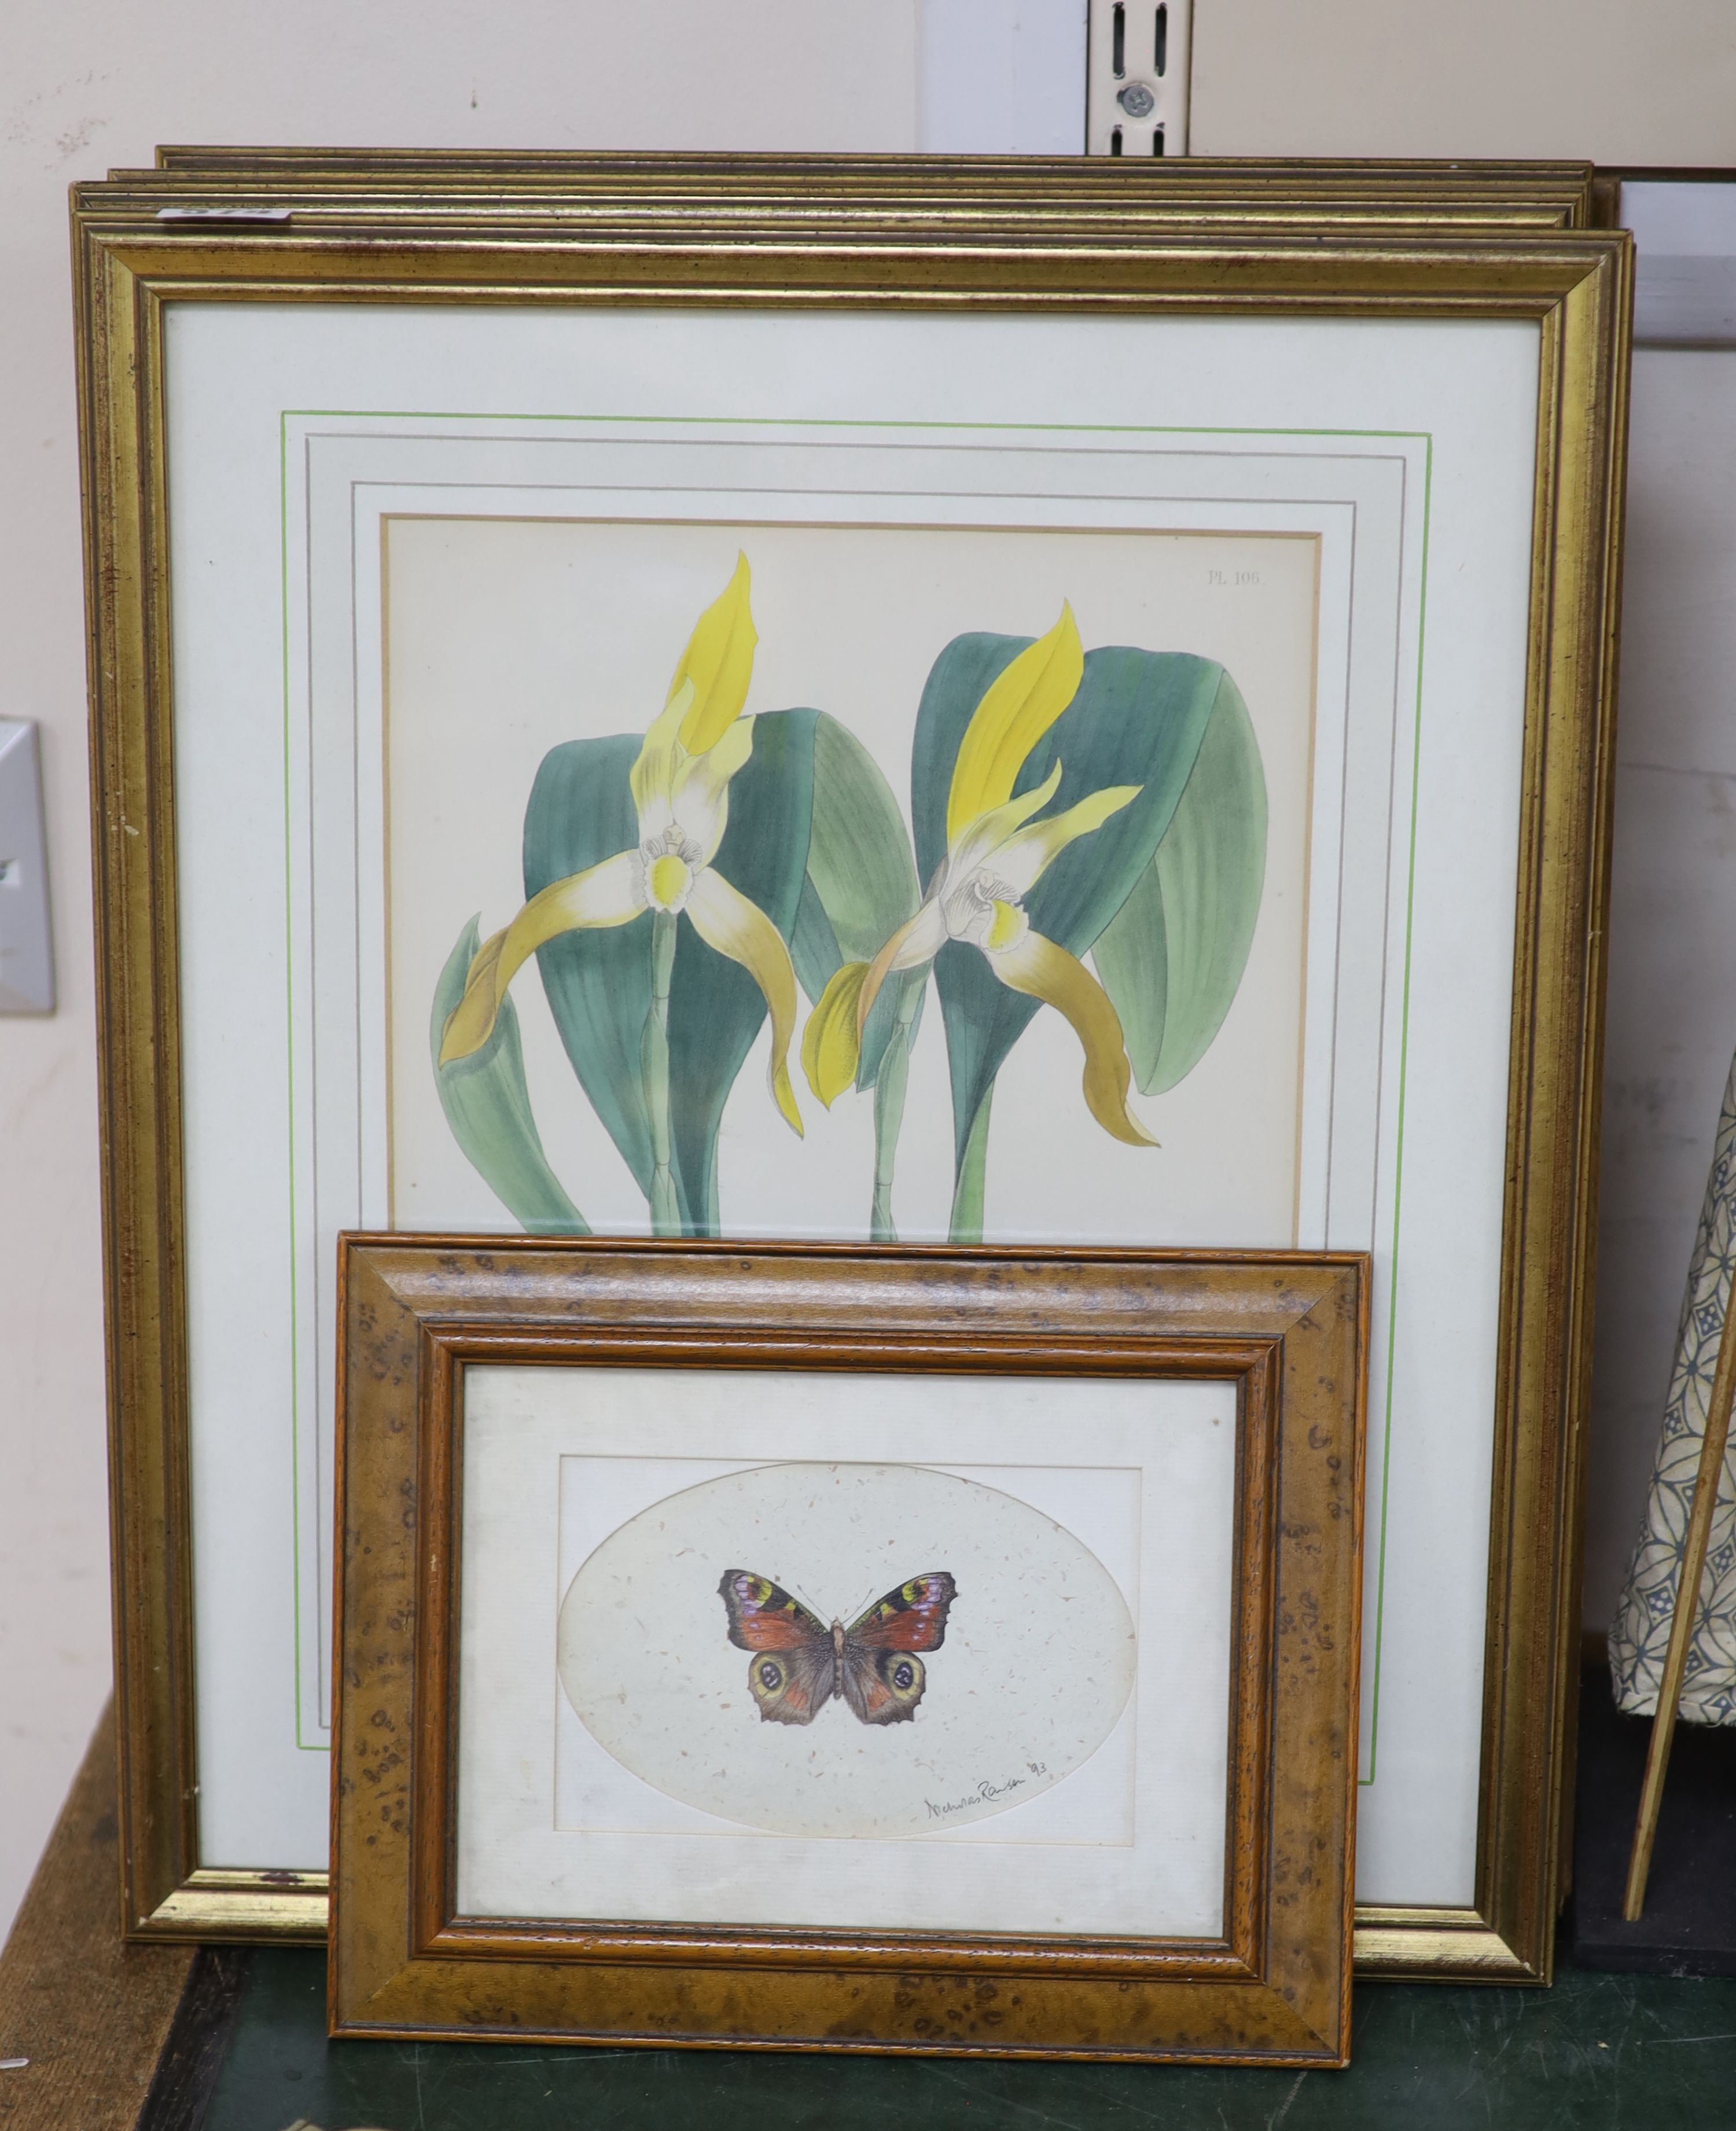 J.Nugent Fitch after B.S.Williams, a set of seven coloured lithographs, Studies of orchids, 29 x 23cm and a small watercolour of a butterfly by Nicholas Raison, 9 x 14.5cm